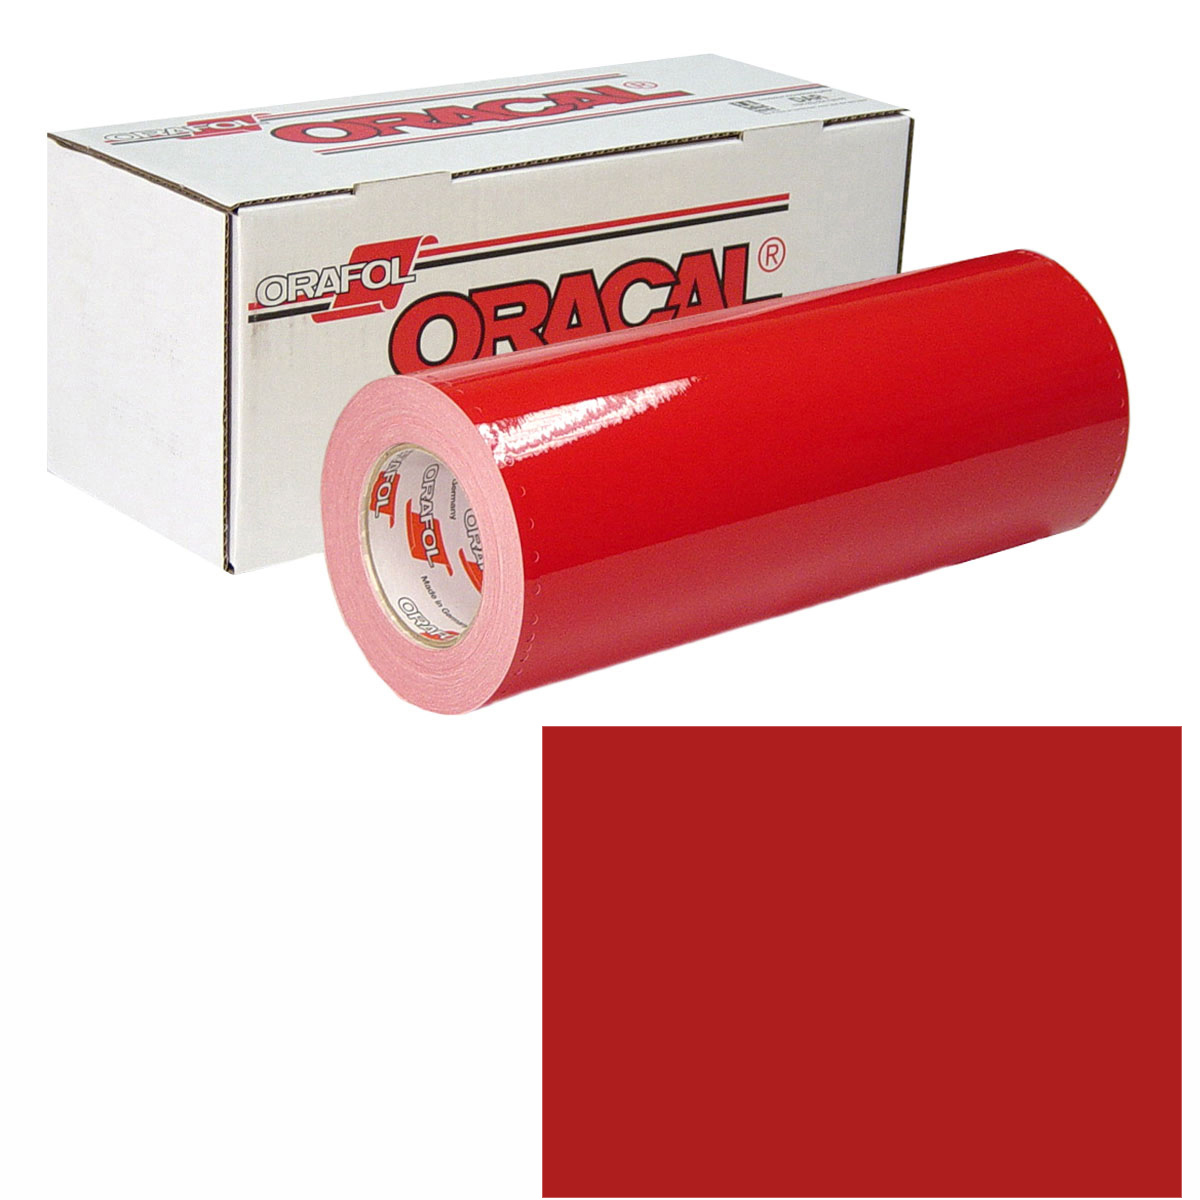 ORACAL 951 15in X 10yd 031 Red